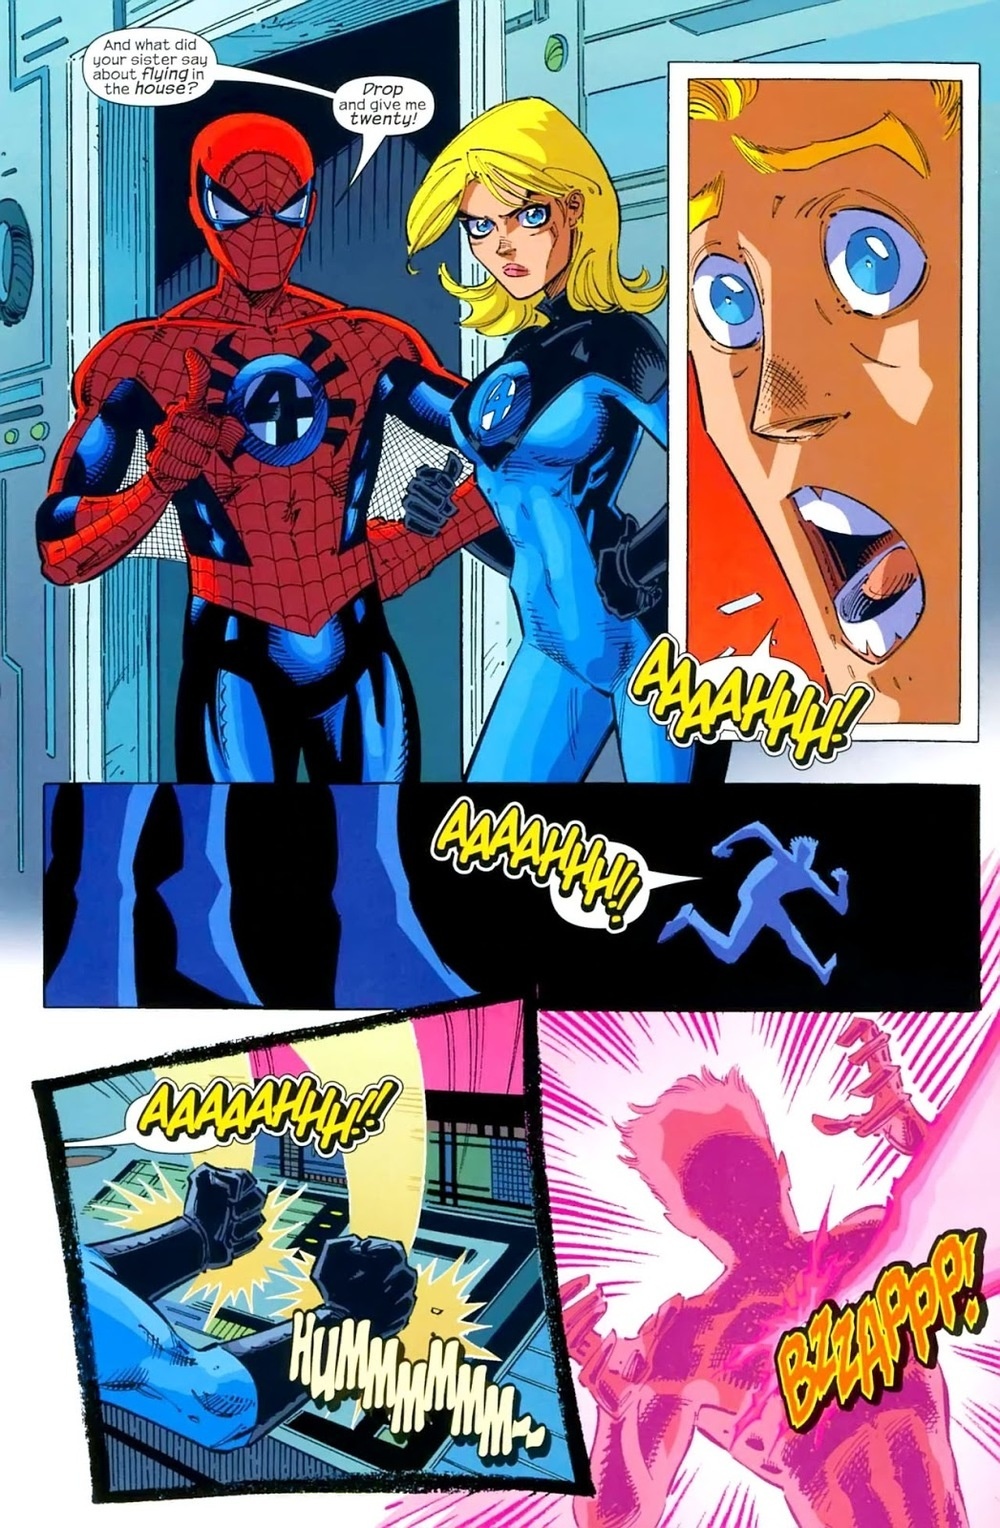 Spider-man X Invisible Woman - #179680369 added by greeeed at Thicc